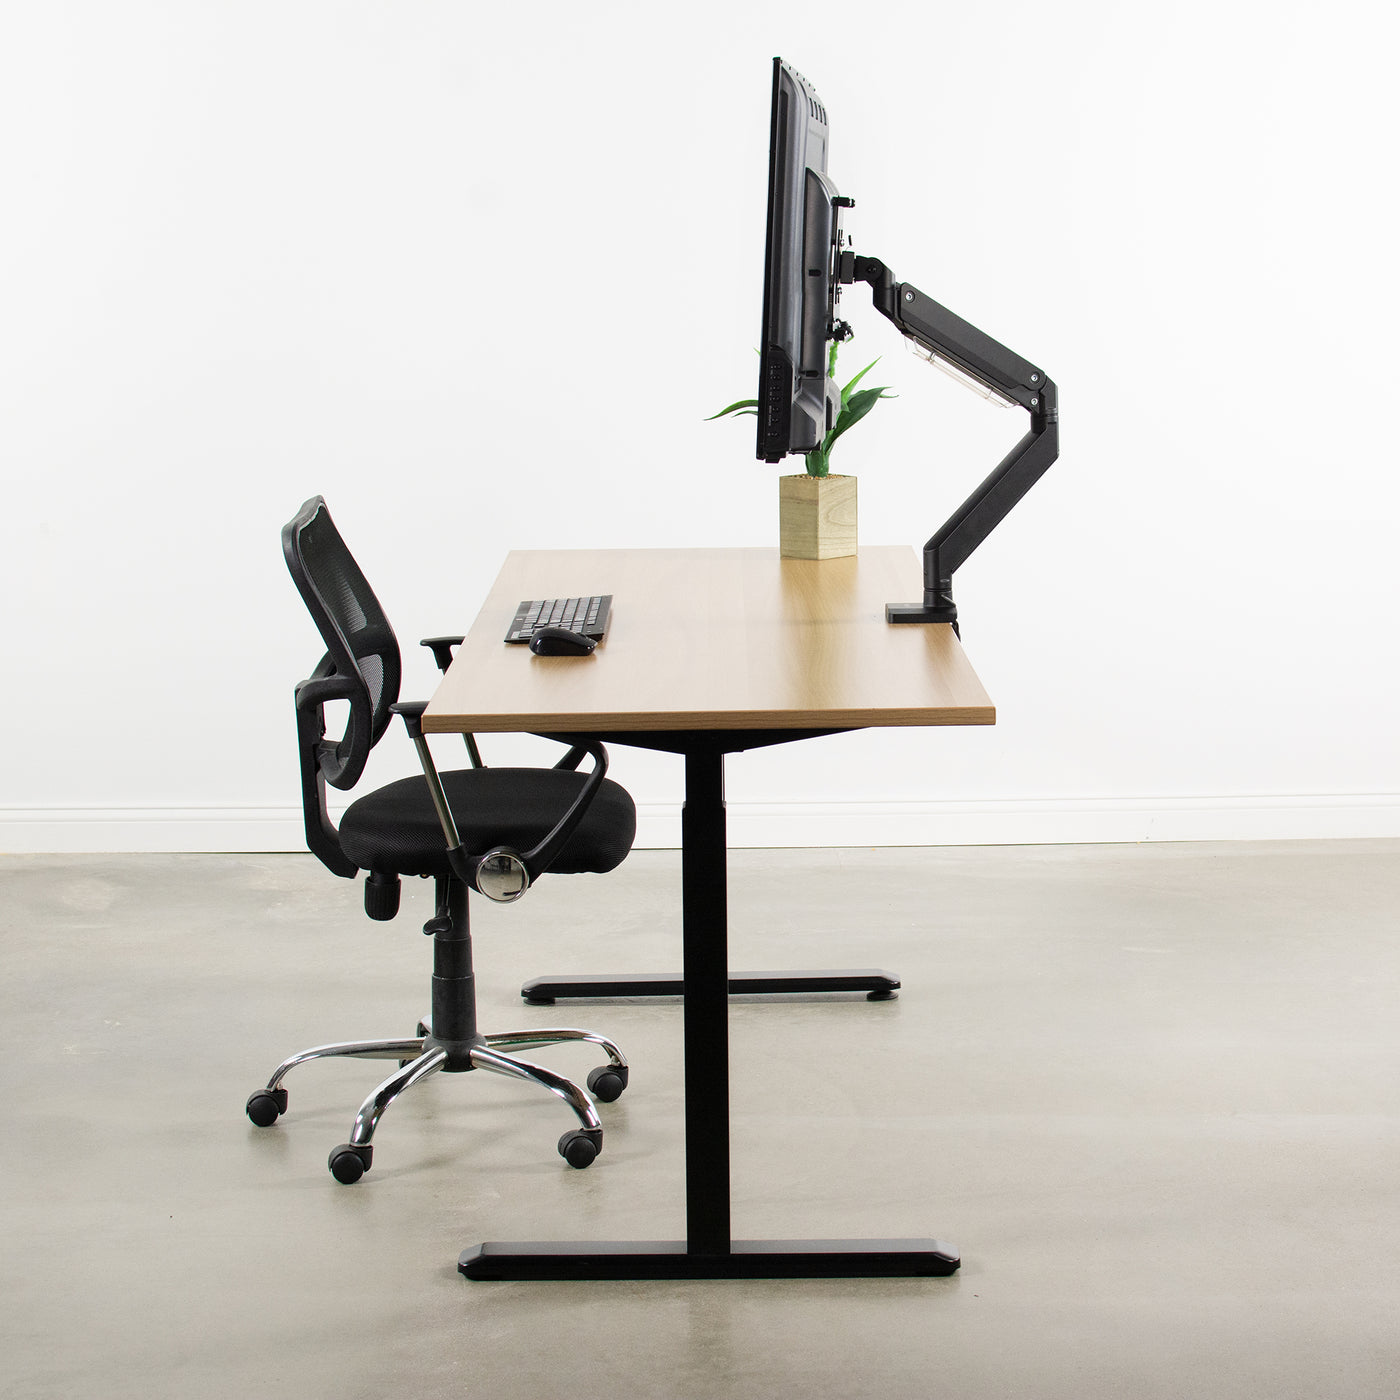 Side view of modern office desk space with large desk-mounted monitor, pneumatic arm, and sturdy VESA plate.